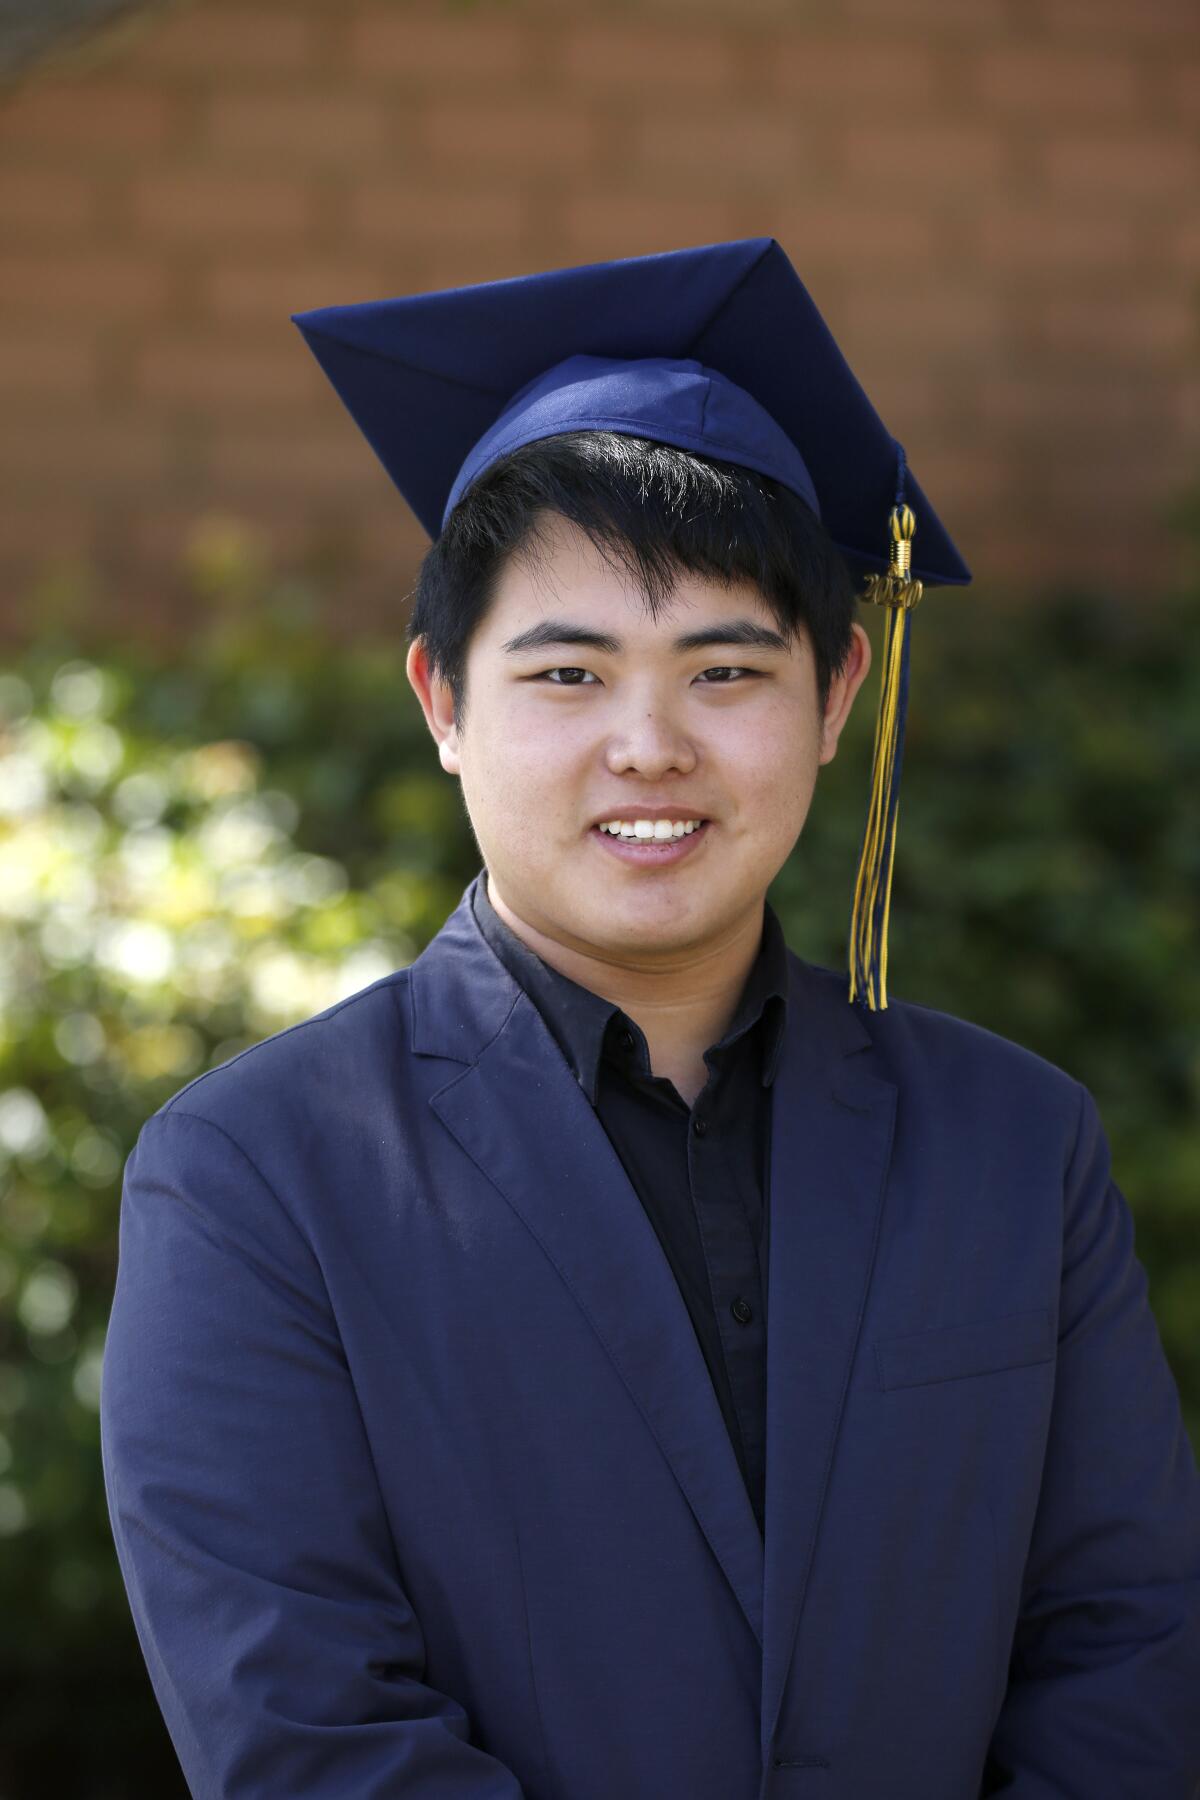 Chang Yao (Tommy), 19, of Irvine, is a Newport Christian School graduating senior for the class of 2020.